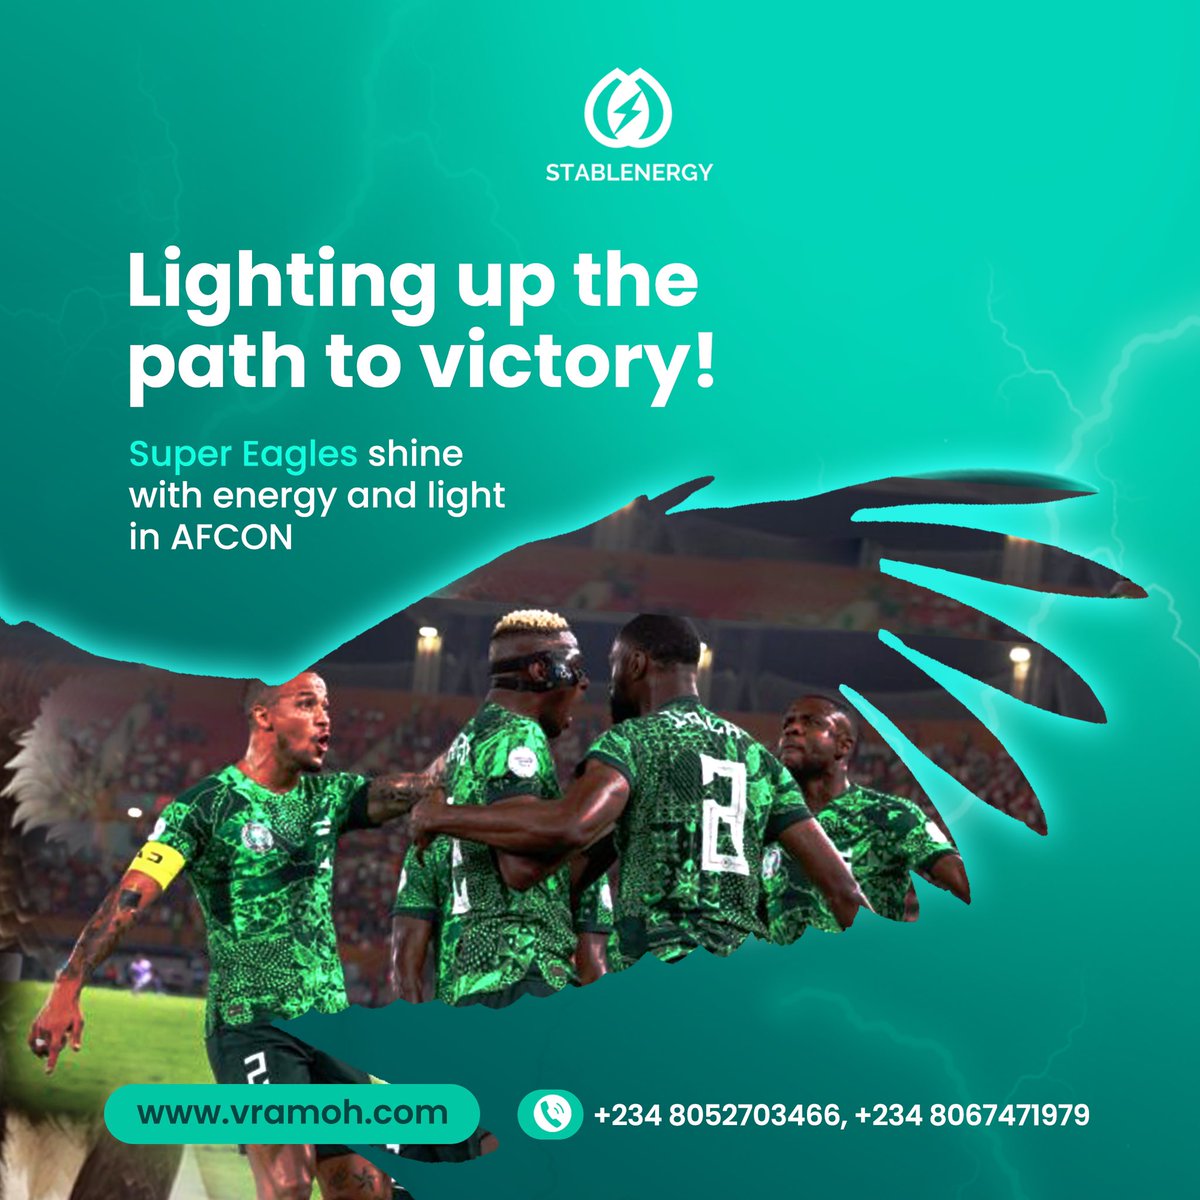 let's shine a light on victory! As the Super Eagles soar in AFCON, we're behind them every step of the way. Just like Stablenergy keeps the lights on, the Super Eagles are bringing the power to the tournament🏆 #nigeriafootball #Afcon #uninterruptedpower #AFCON2023.